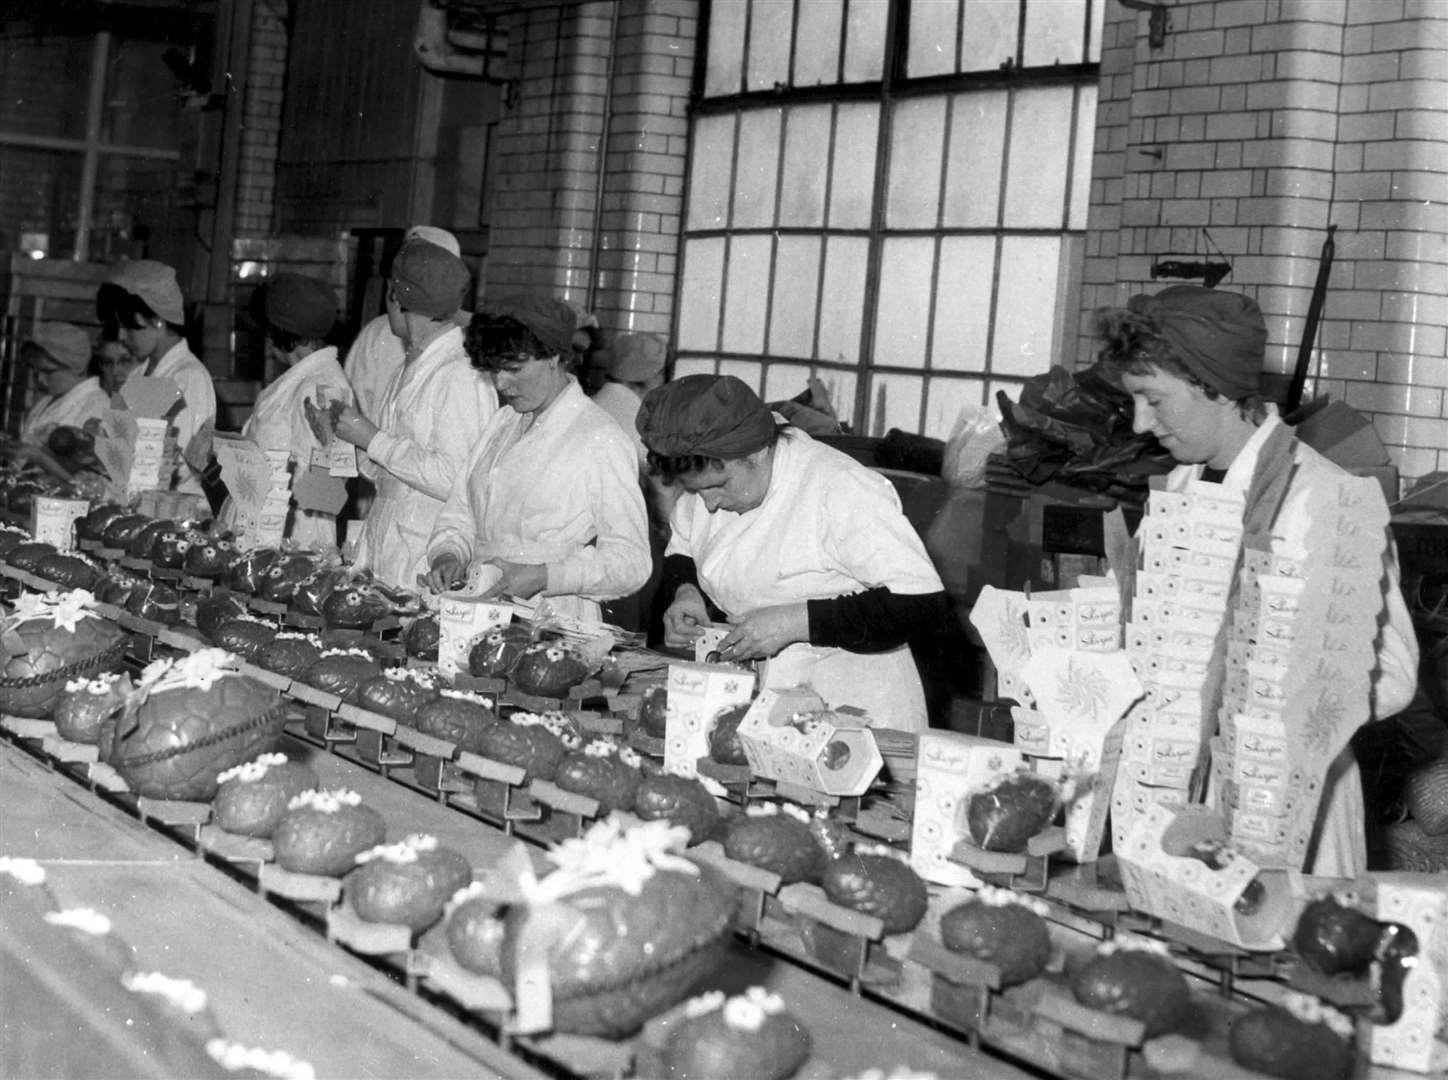 The production line at the Sharps toffee factory in Maidstone